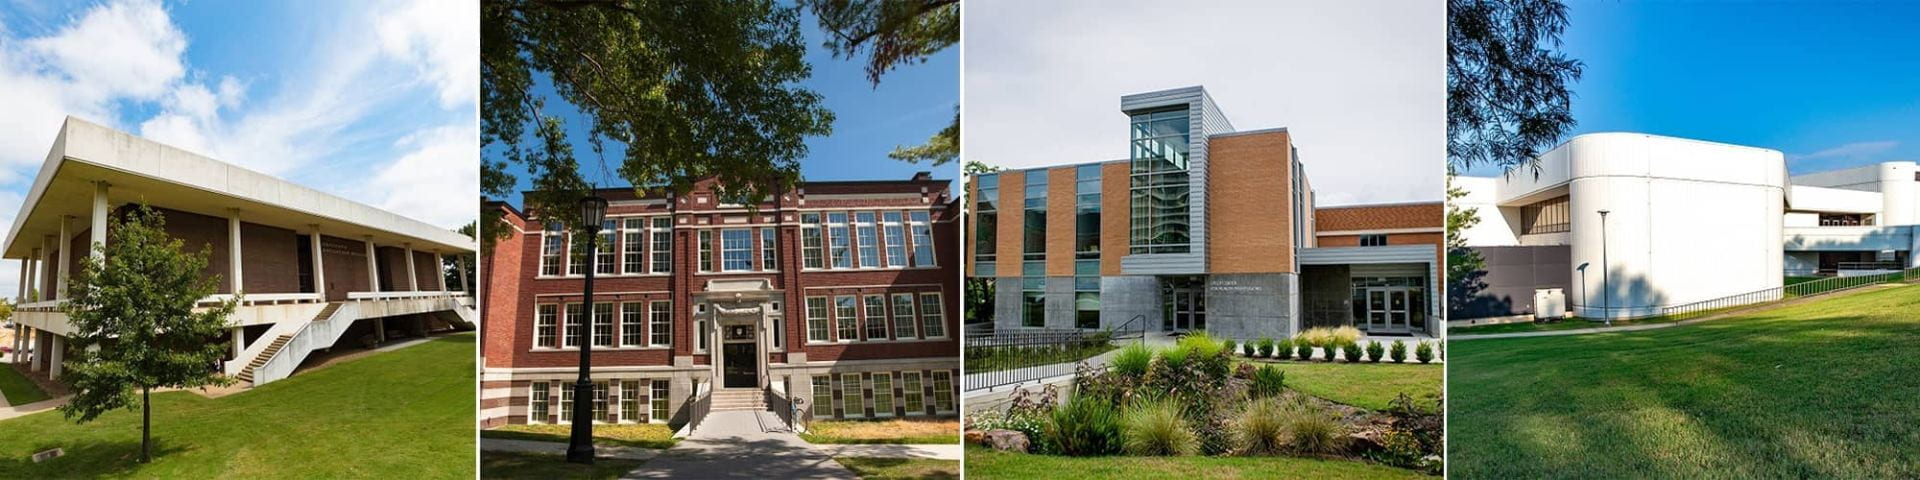 Graduate Education building (from left), Peabody Hall, Epley Center for Health Professions, and Health, Physical Education and Recreation (HPER) Building